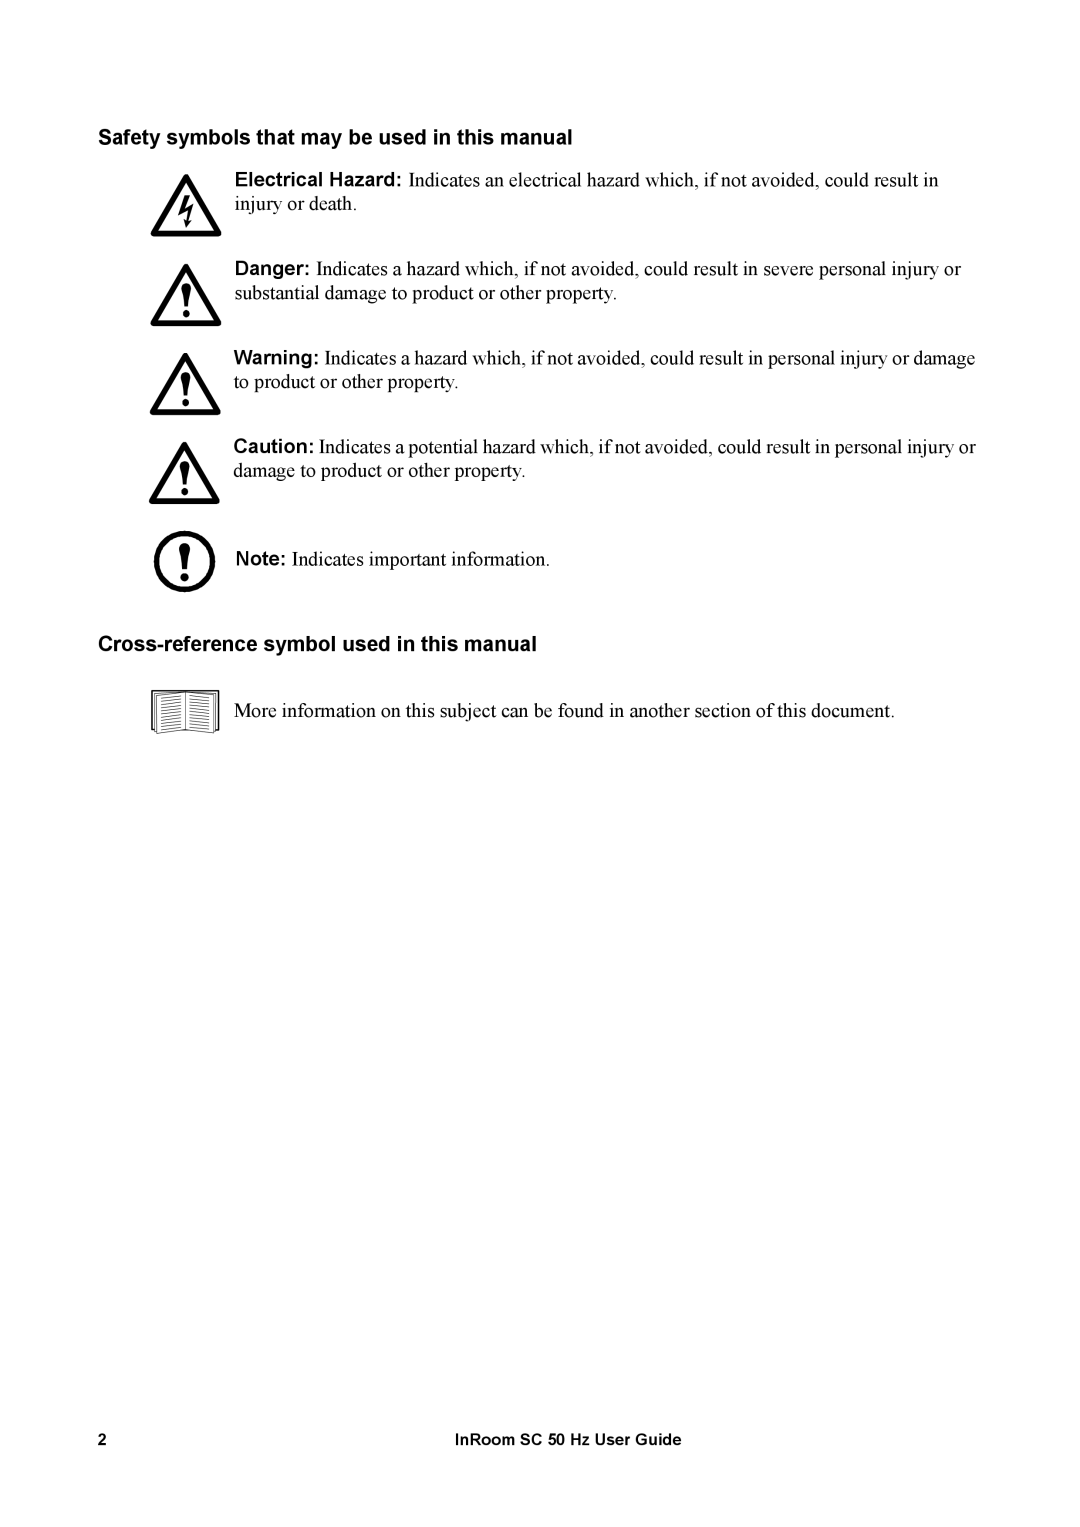 APC ACPSC3000 Safety symbols that may be used in this manual, Cross-referencesymbol used in this manual 